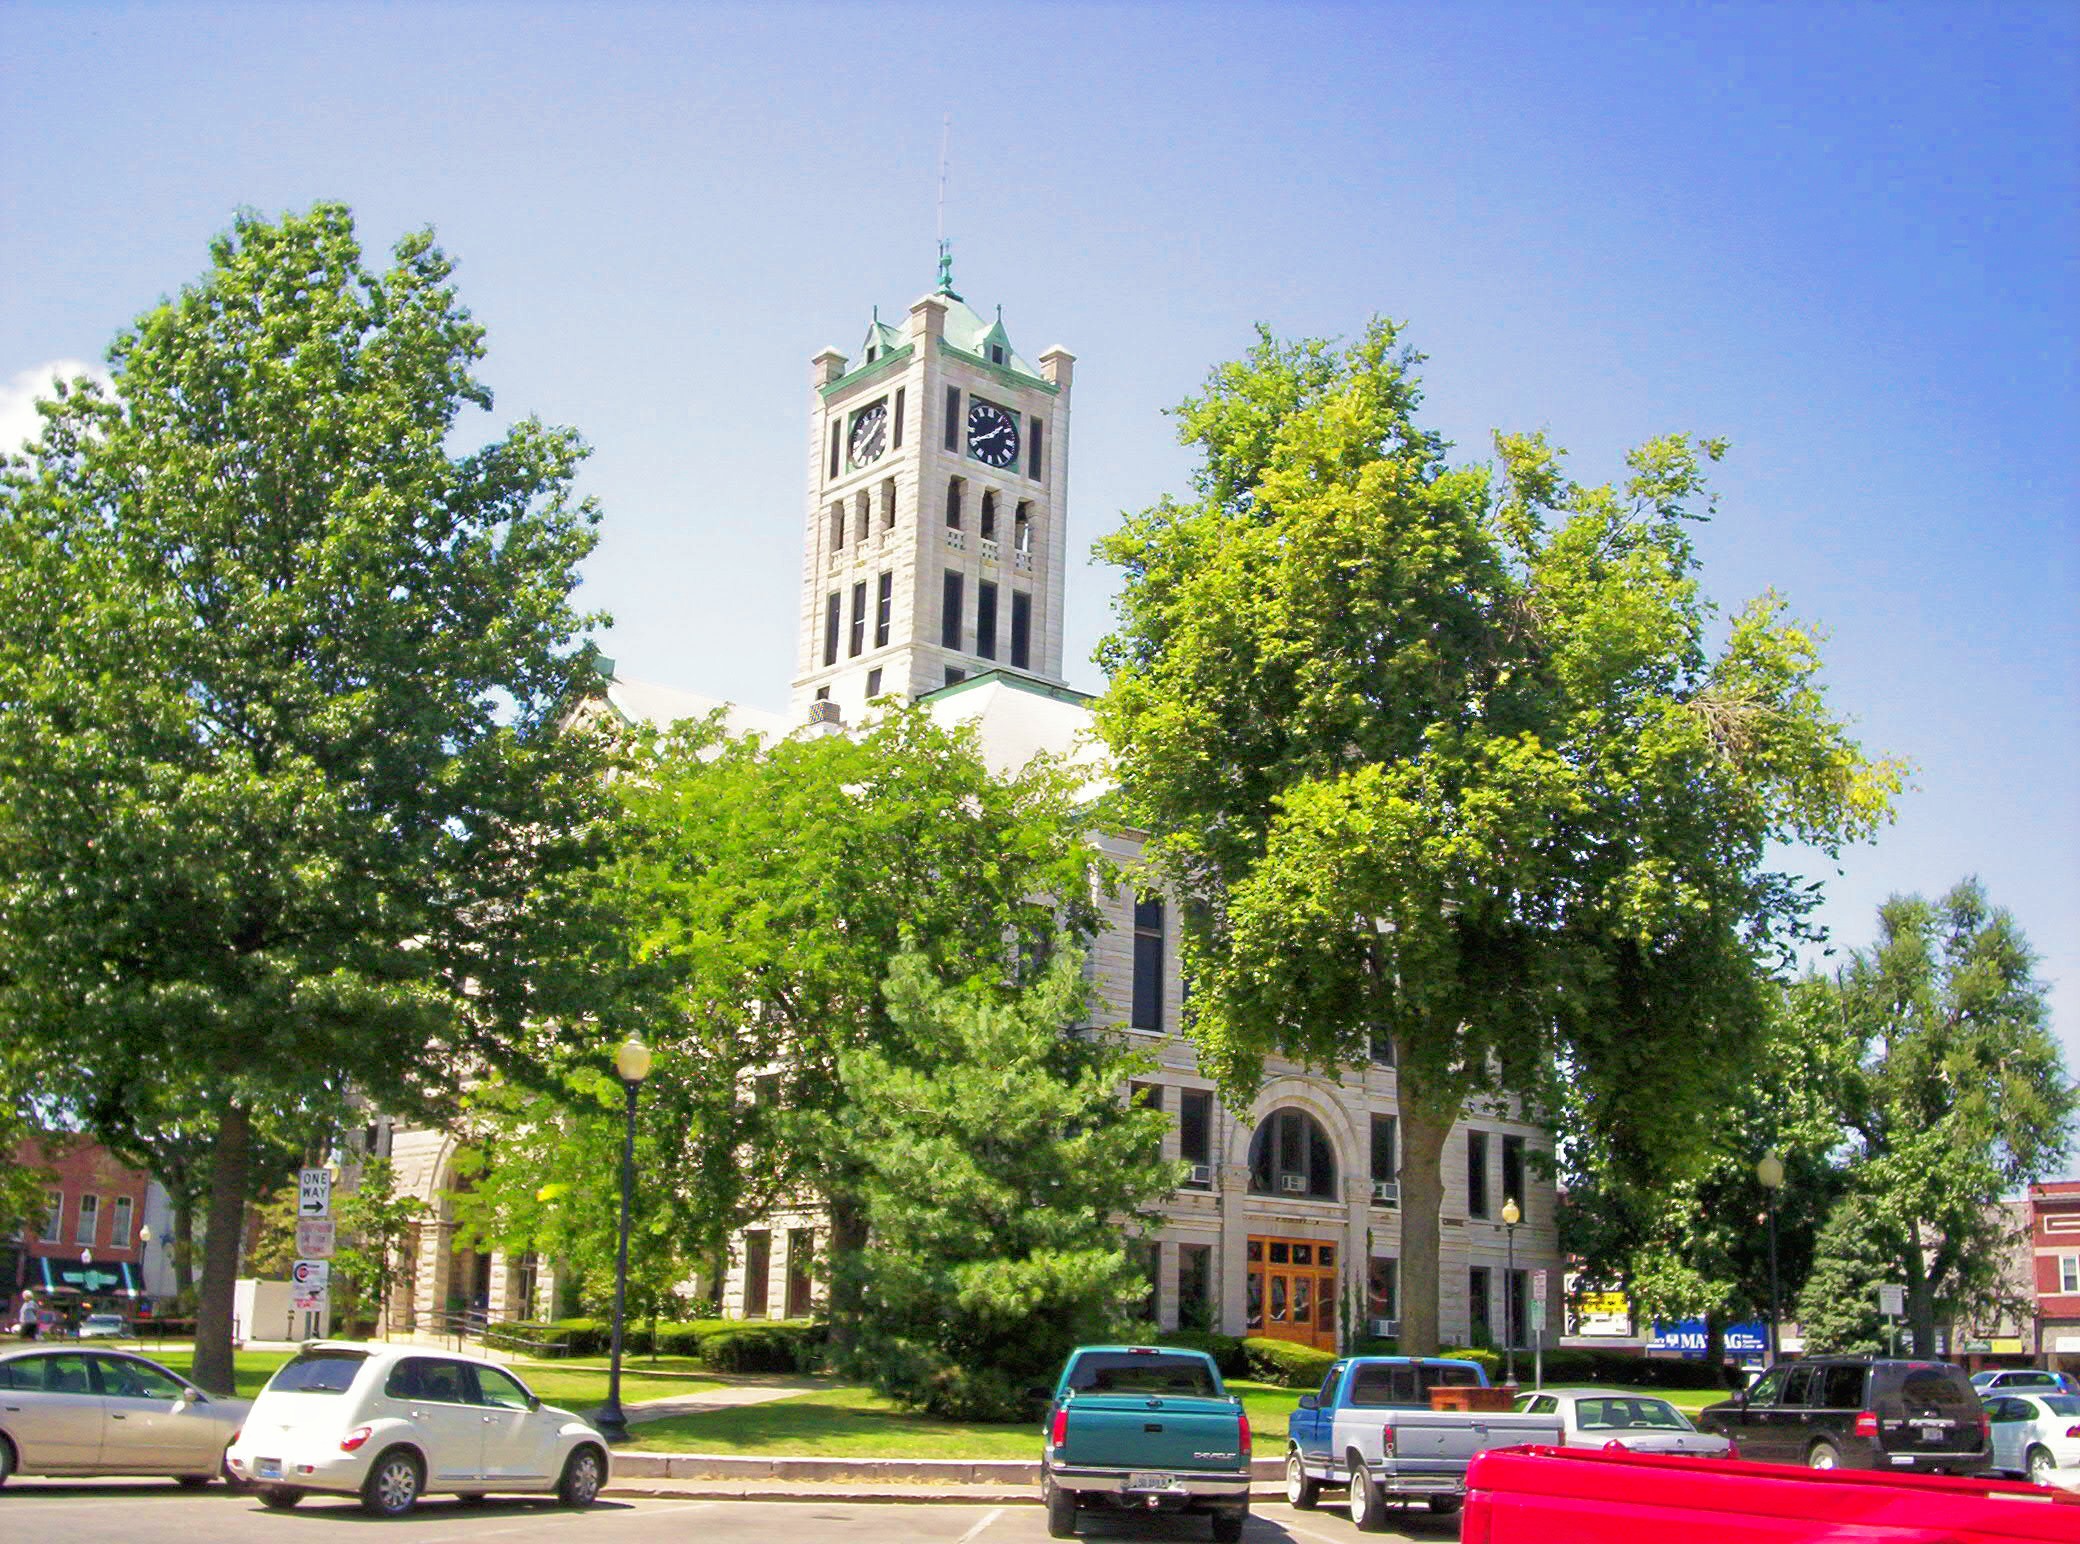 The Christian County Courthouse in Taylorville, Illinois